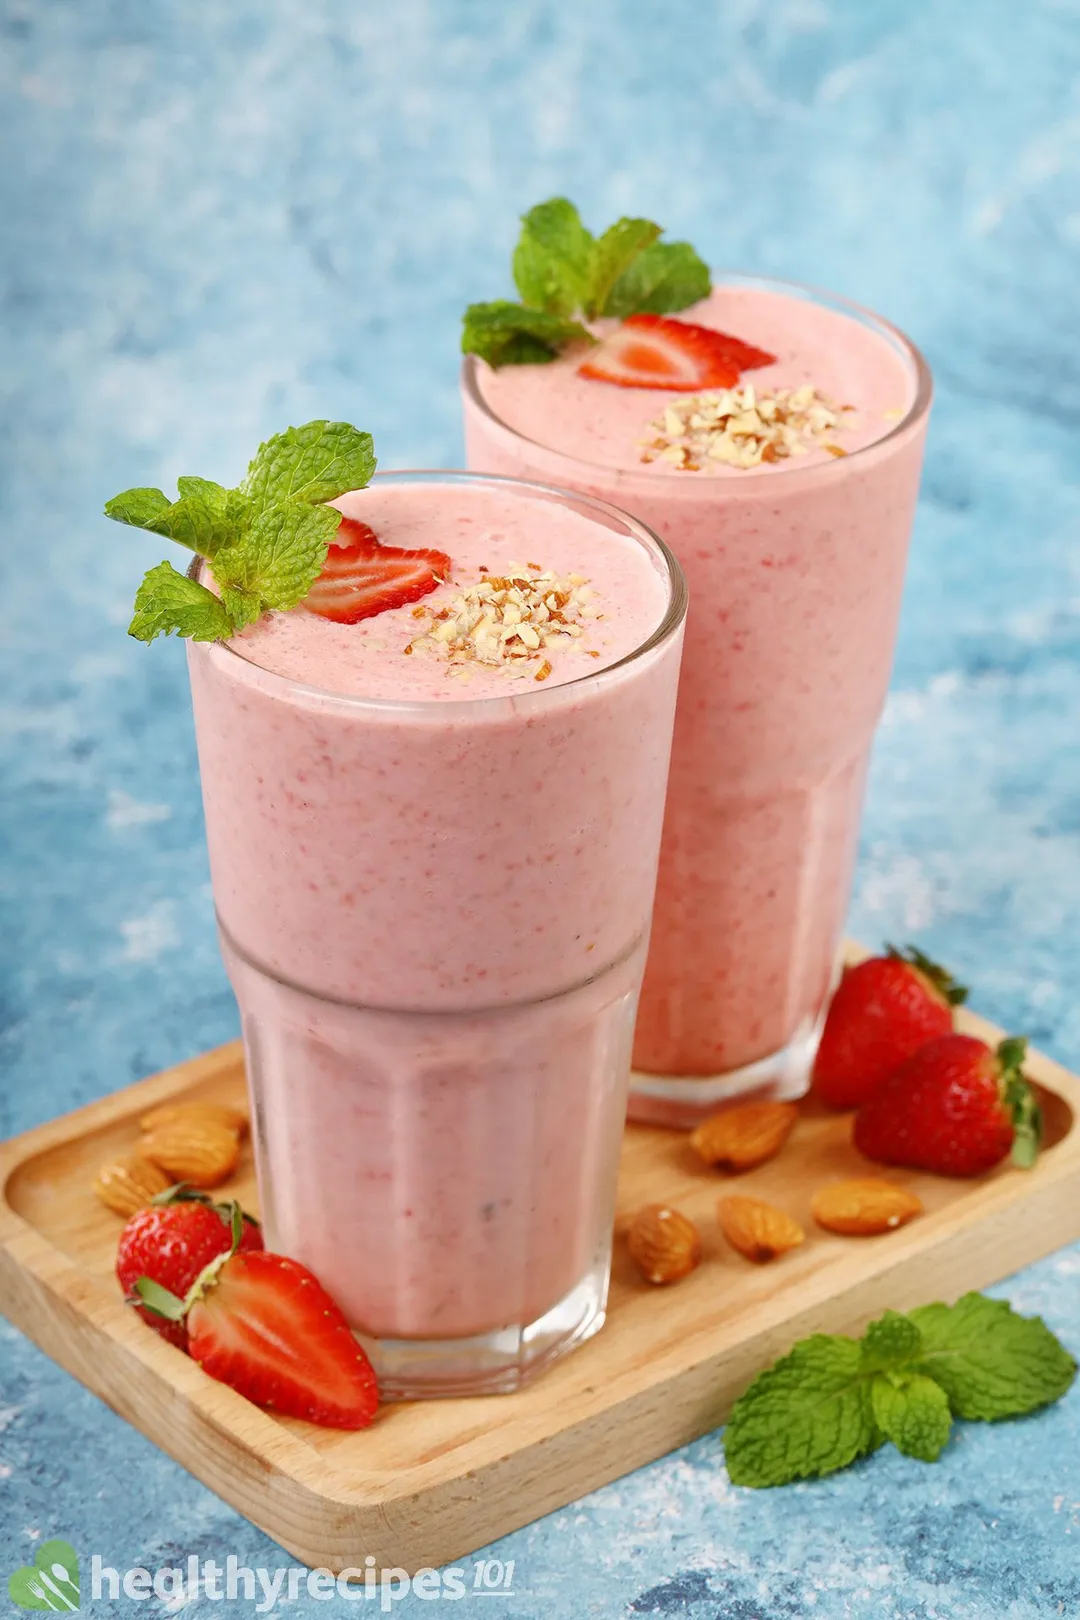 Two glasses of strawberry smoothie laid on a wooden board near strawberry slices and mint leaves.